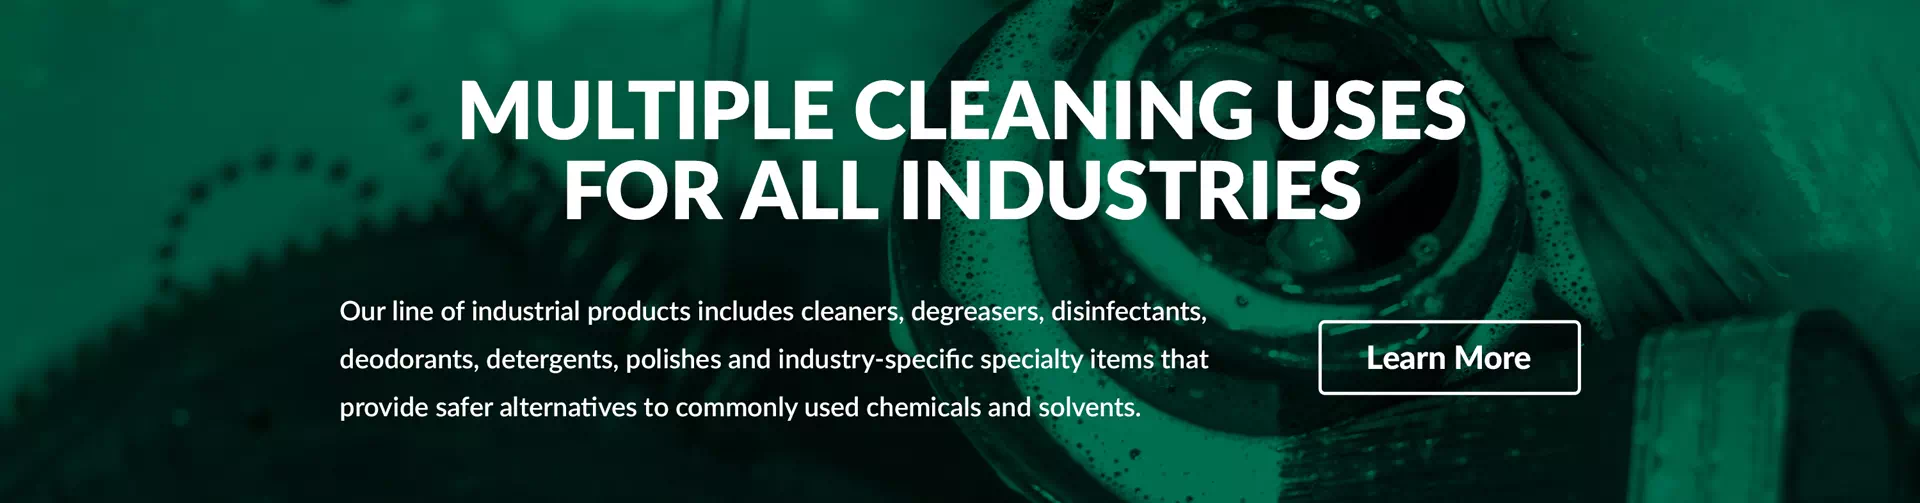 Cleaning Uses